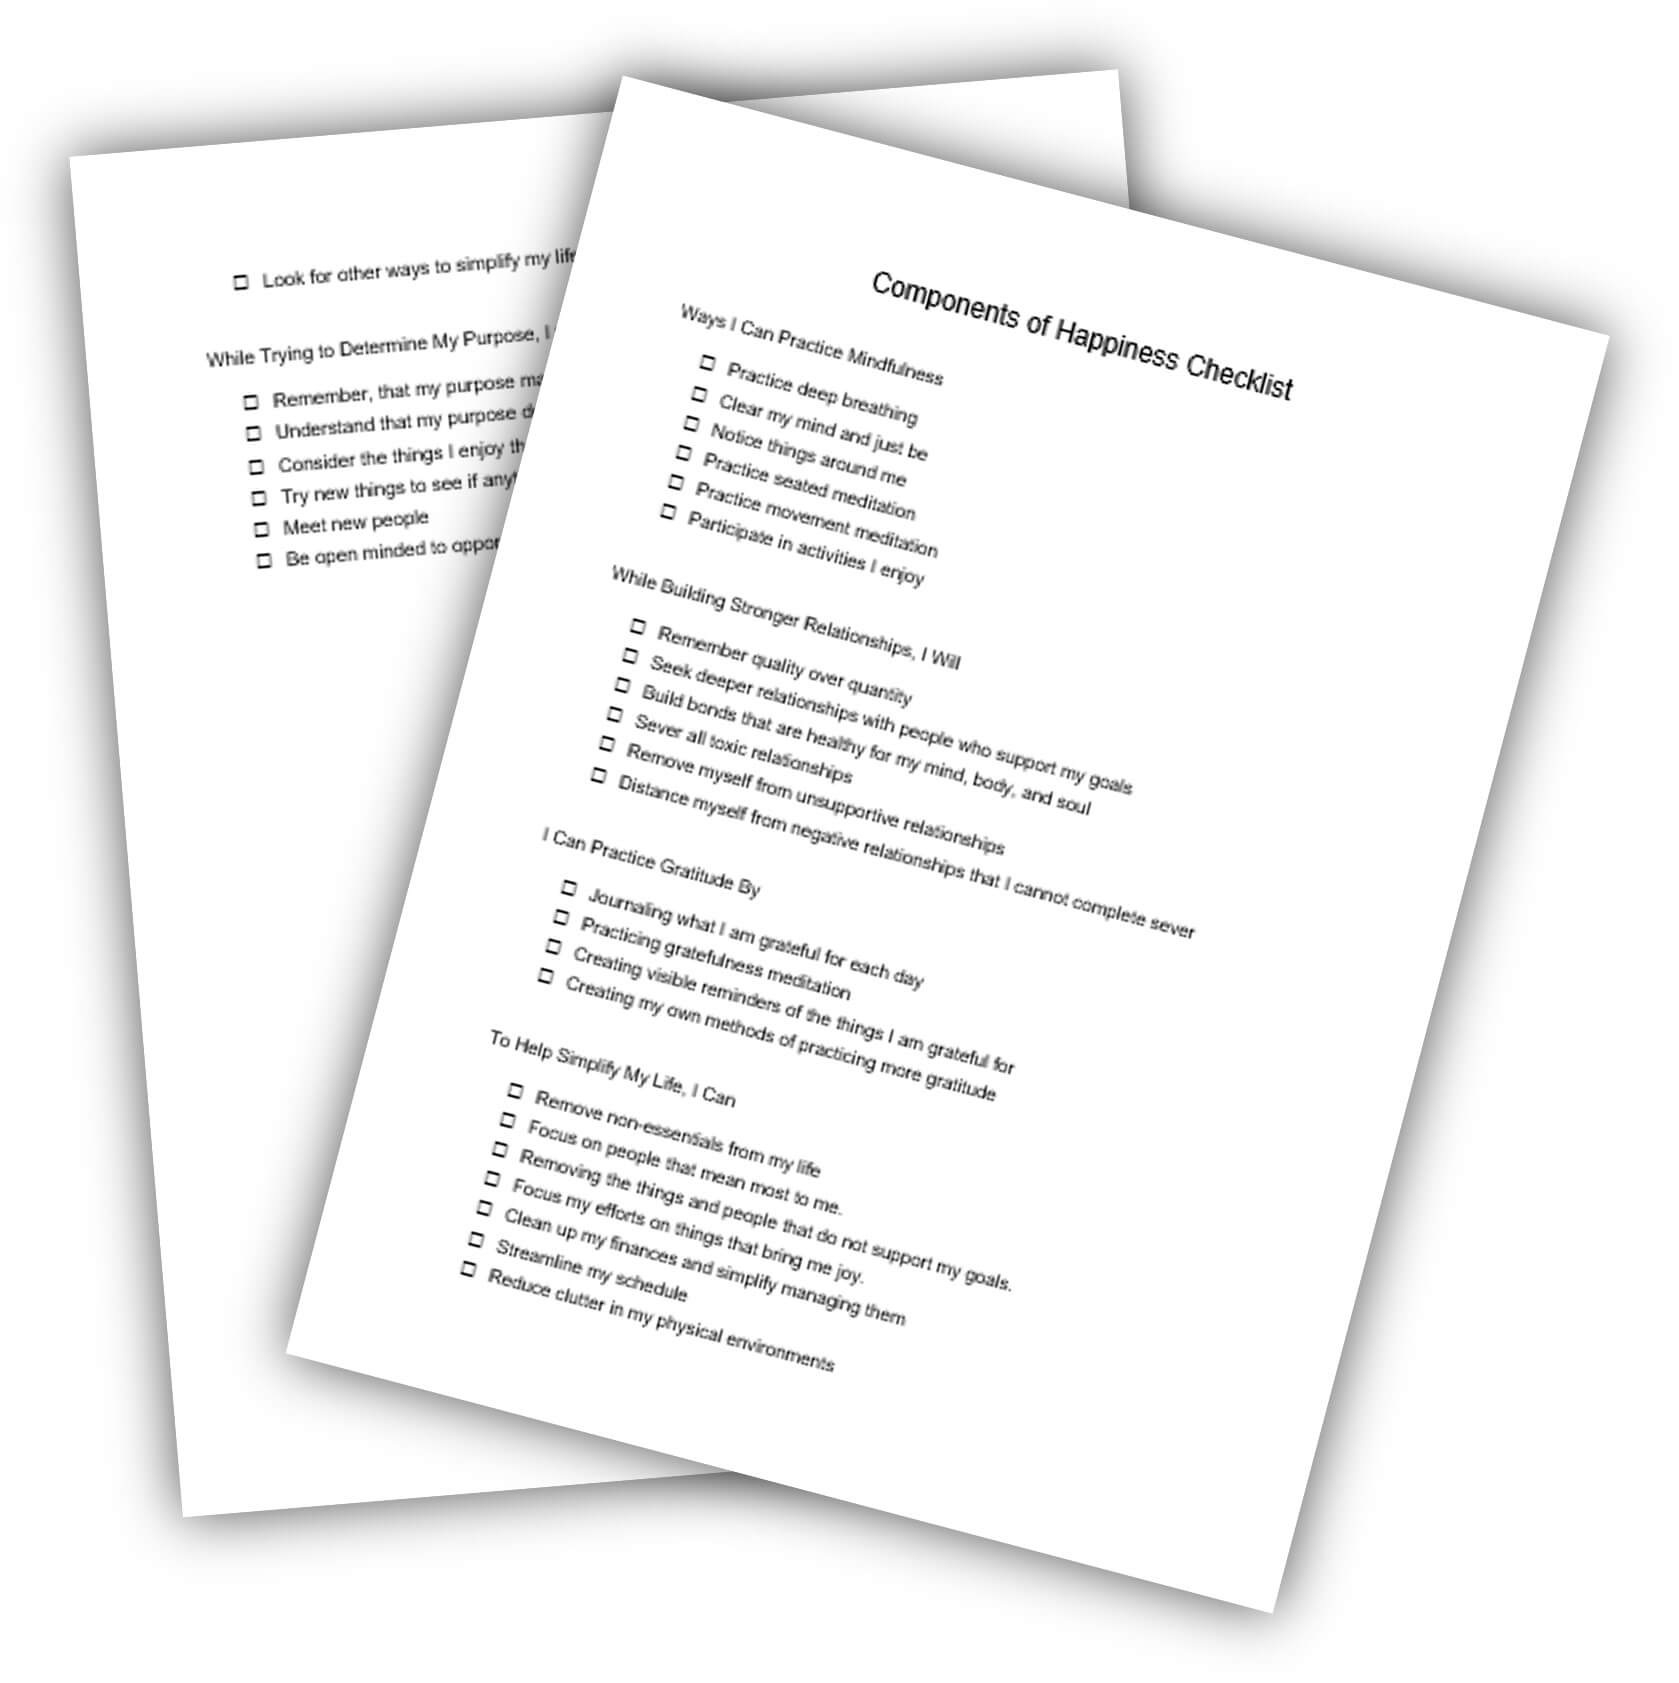 Components of Happiness Checklist PLR